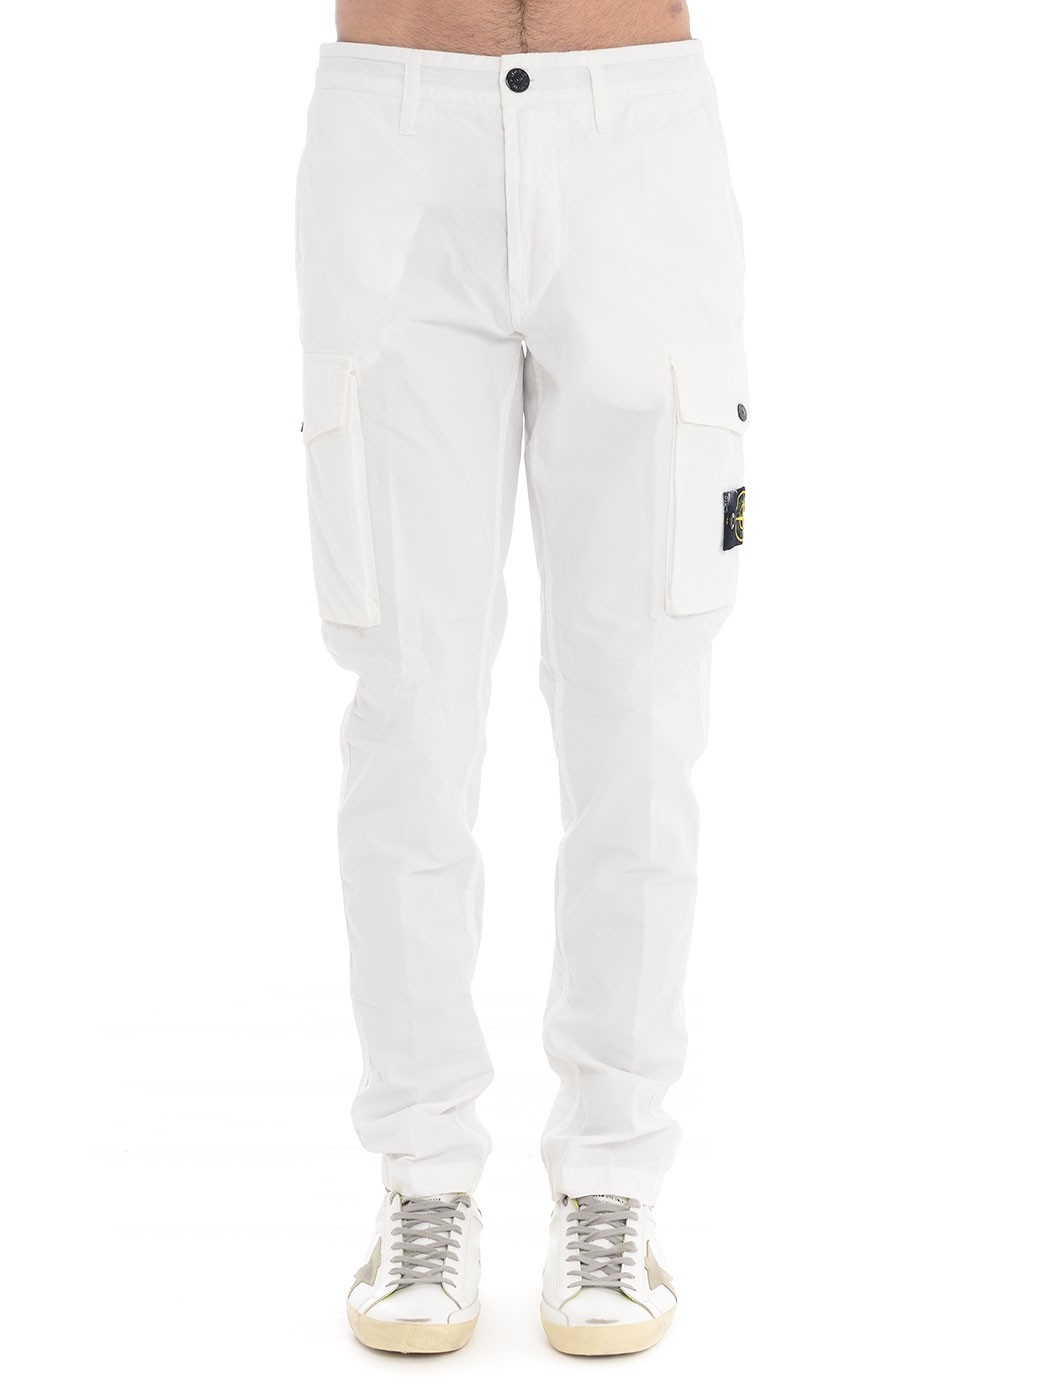  MAN TROUSERS,SPRING SUMMER TROUSERS,COTTON TROUSERS,SKIN FIT TROUSERS,INCOTEX TROUSERS,JACOB COHEN TROUSERS,NEIL BARRETT TROUSERS,MSGM TROUSERS  STONE ISLAND 7415318WA